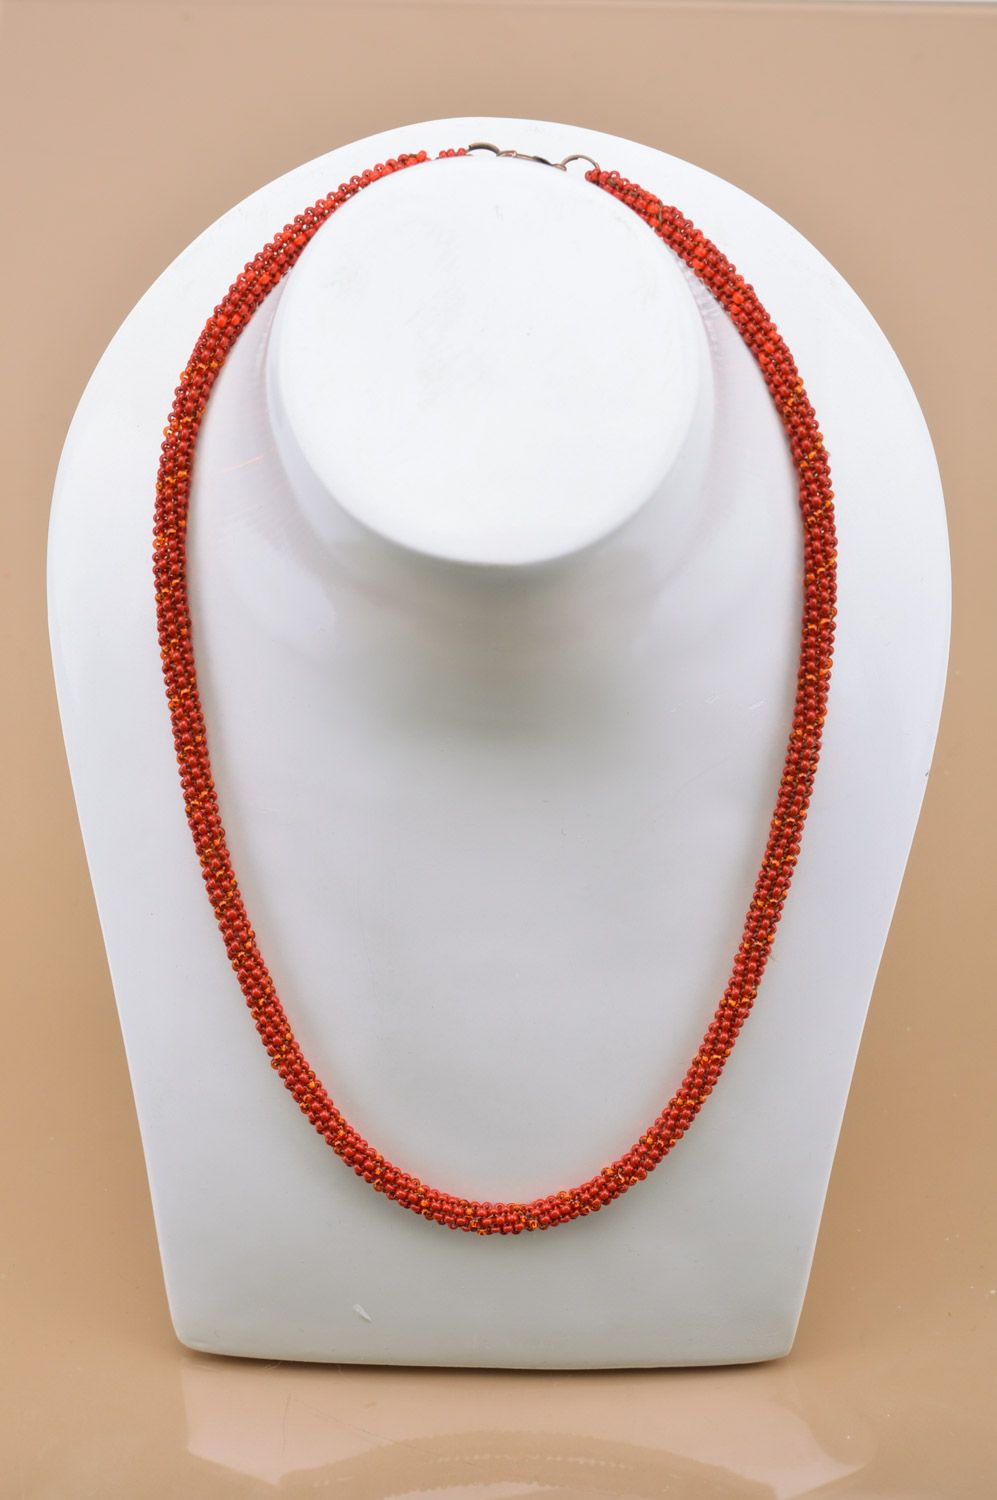 Handmade beaded red cord necklace for women author's work adornment photo 3